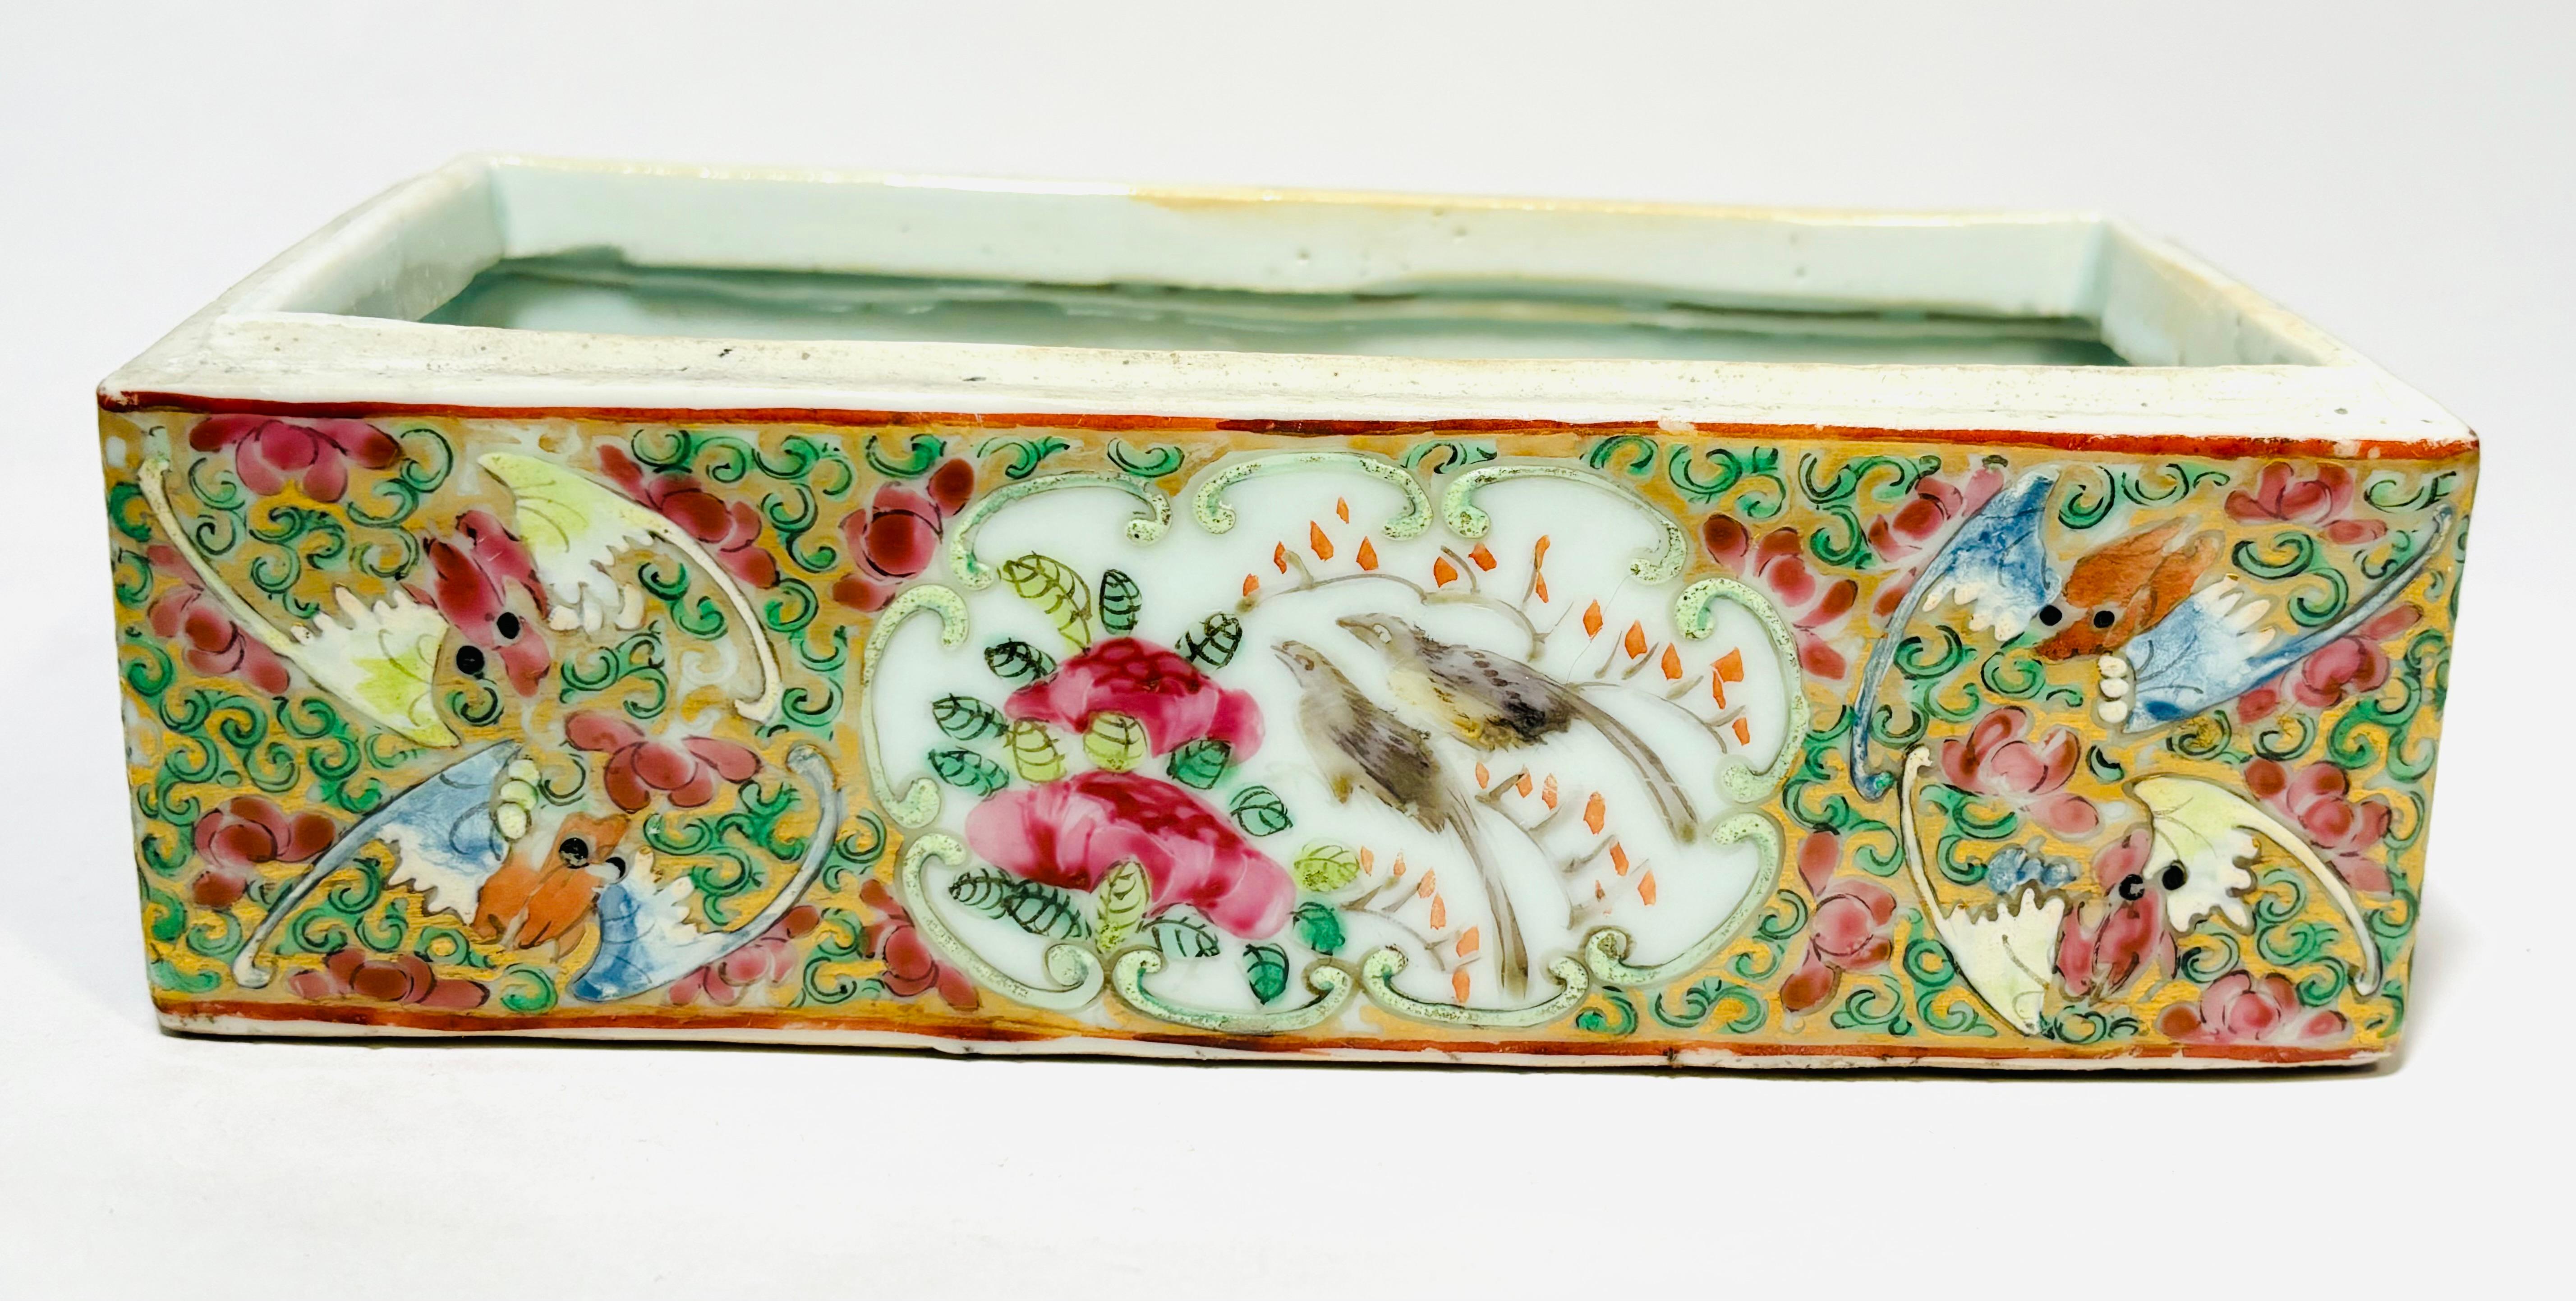 Antique Chinese Famille Rose Porcelain Box or Desk Accessory For Sale 1